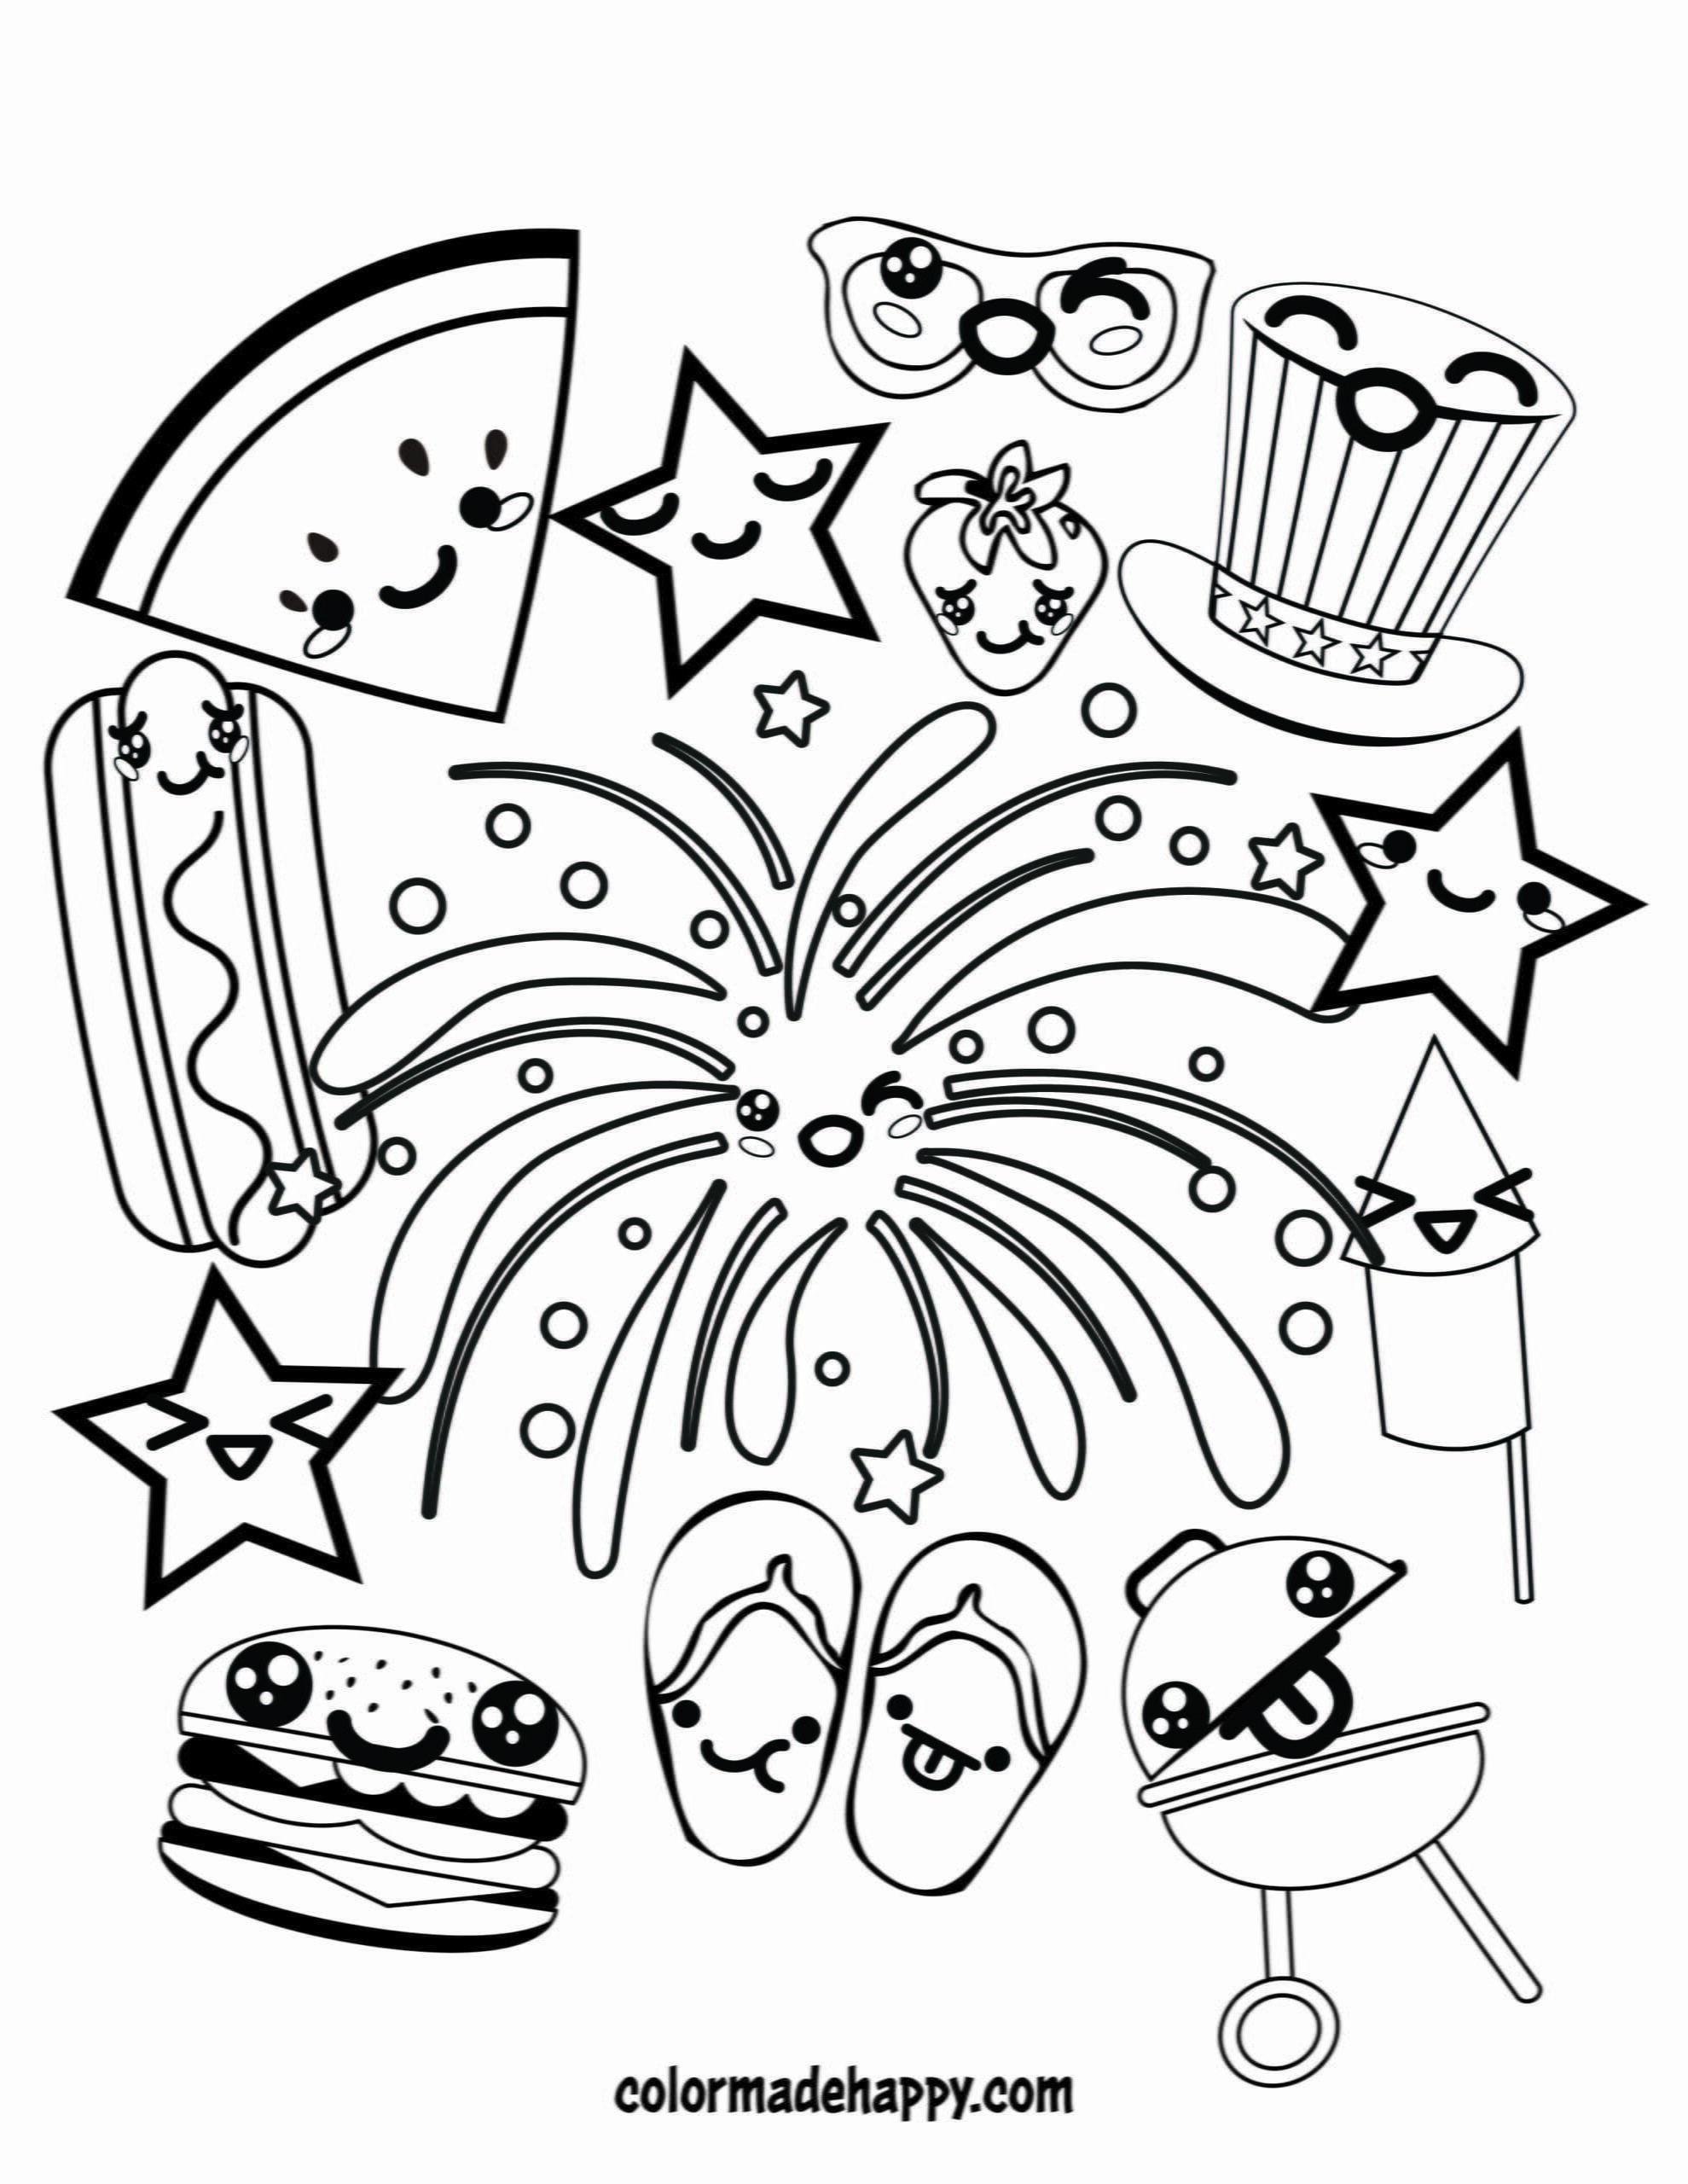 Celebrate Freedom with 4th of July: 180+ Free Coloring Pages 86